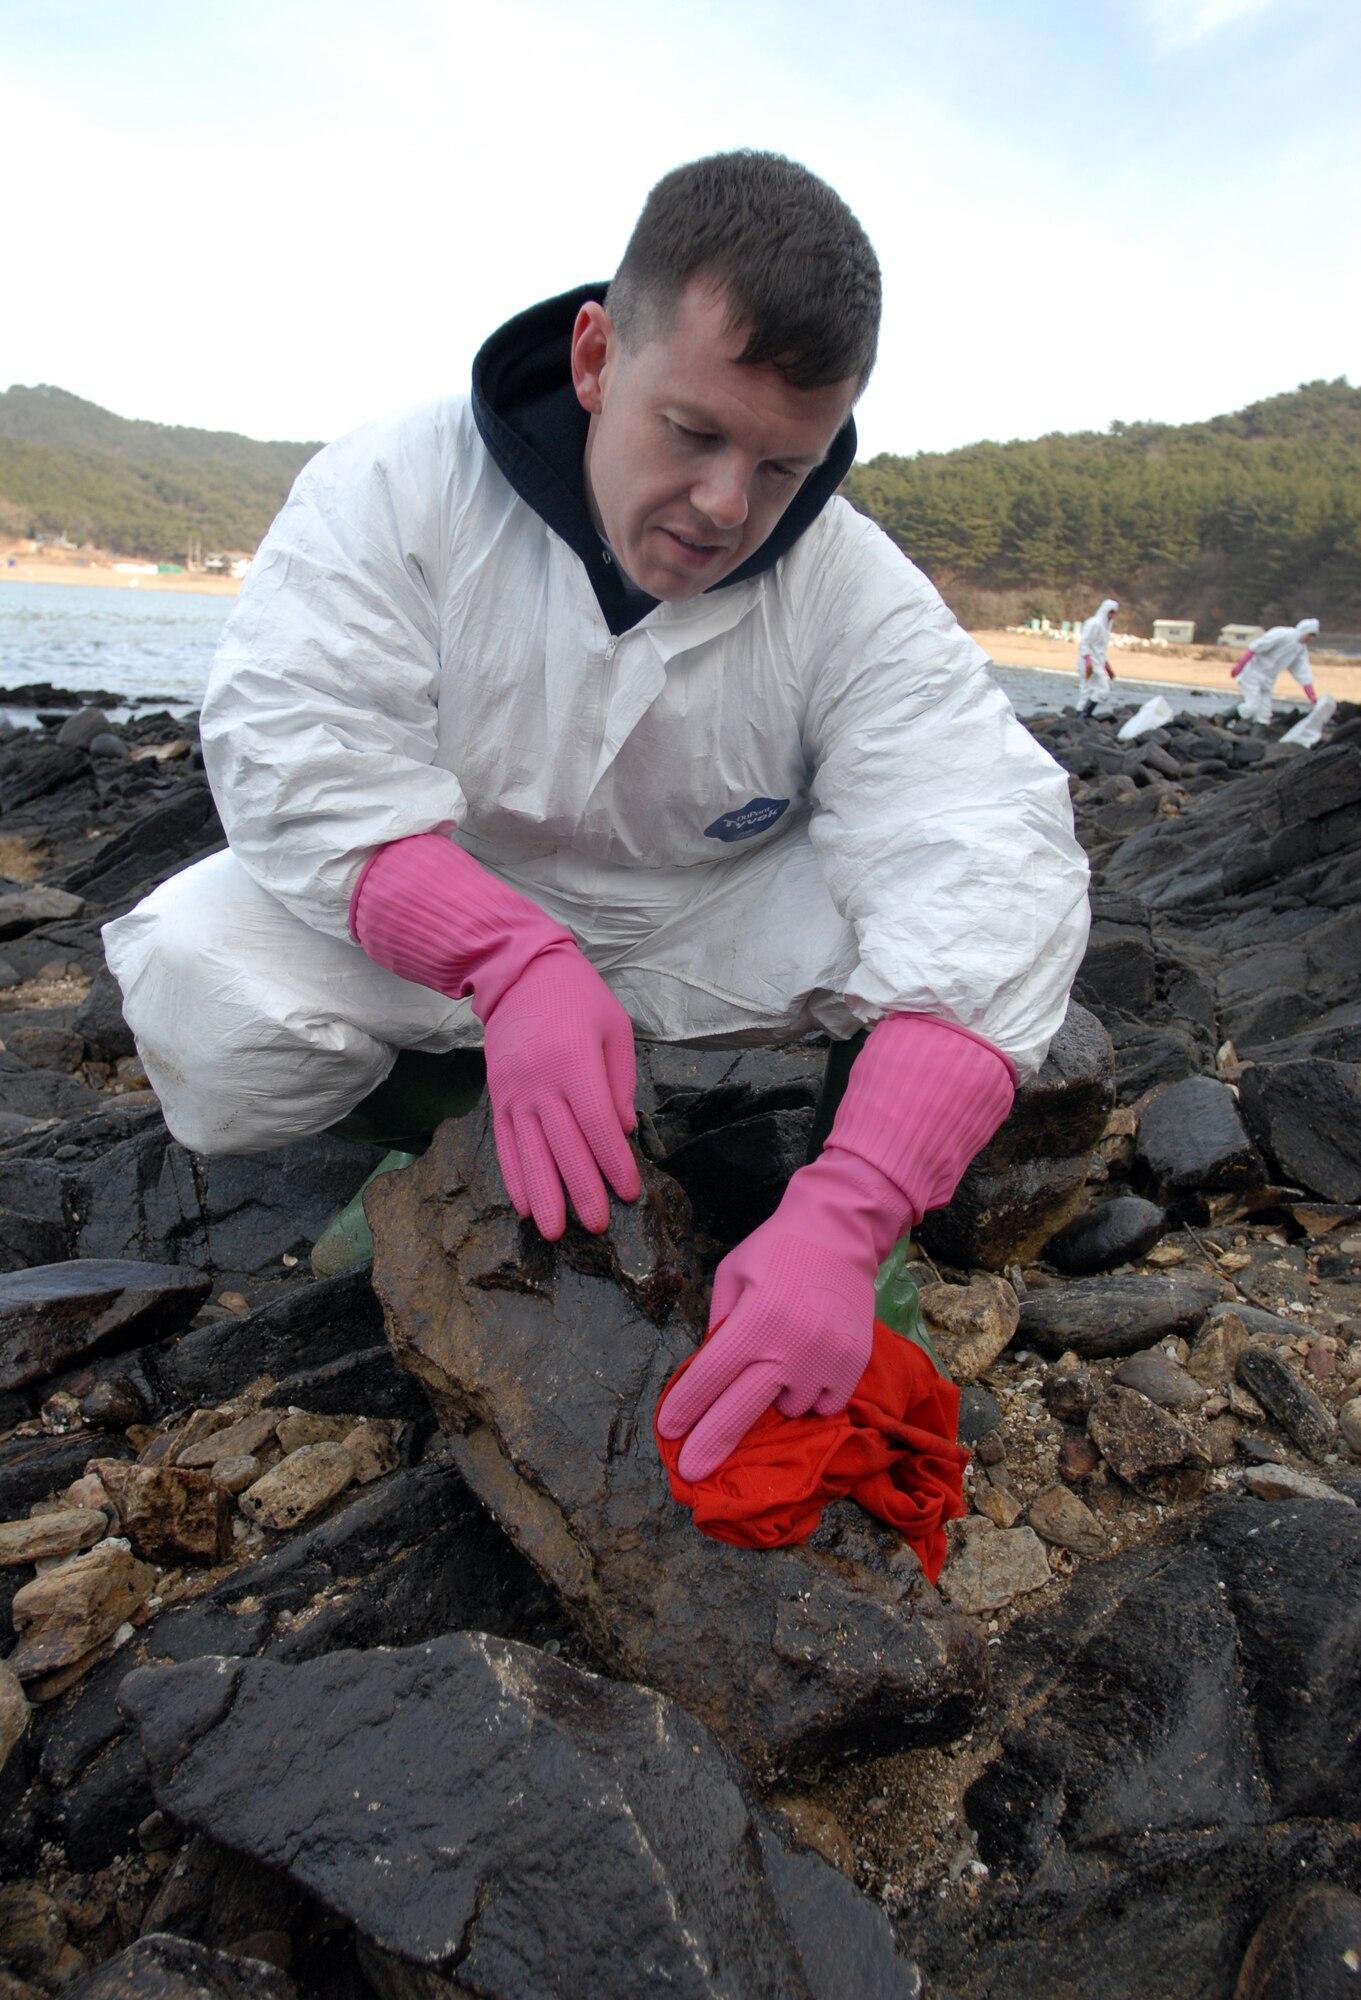 MALLIPO BEACH, South Korea -- Technical Sgt. Jason Rosenbaum, a fireman with the 8th Civil Engineer Squadron, Kunsan Air Base, cleans a rock after crude oil spilled from a crane barge December 7, 2007 and washed ashore here. Over 200,000 volunteers assisted with the clean up of 2.7 million gallons of oil.  Several agencies, to include 13 helicopters, 17 airplanes, 327 vessels and United States Air Force, Army and Korean nationals took part in the clean up efforts. (U.S. Air Force photo/Senior Airman Steven R. Doty)